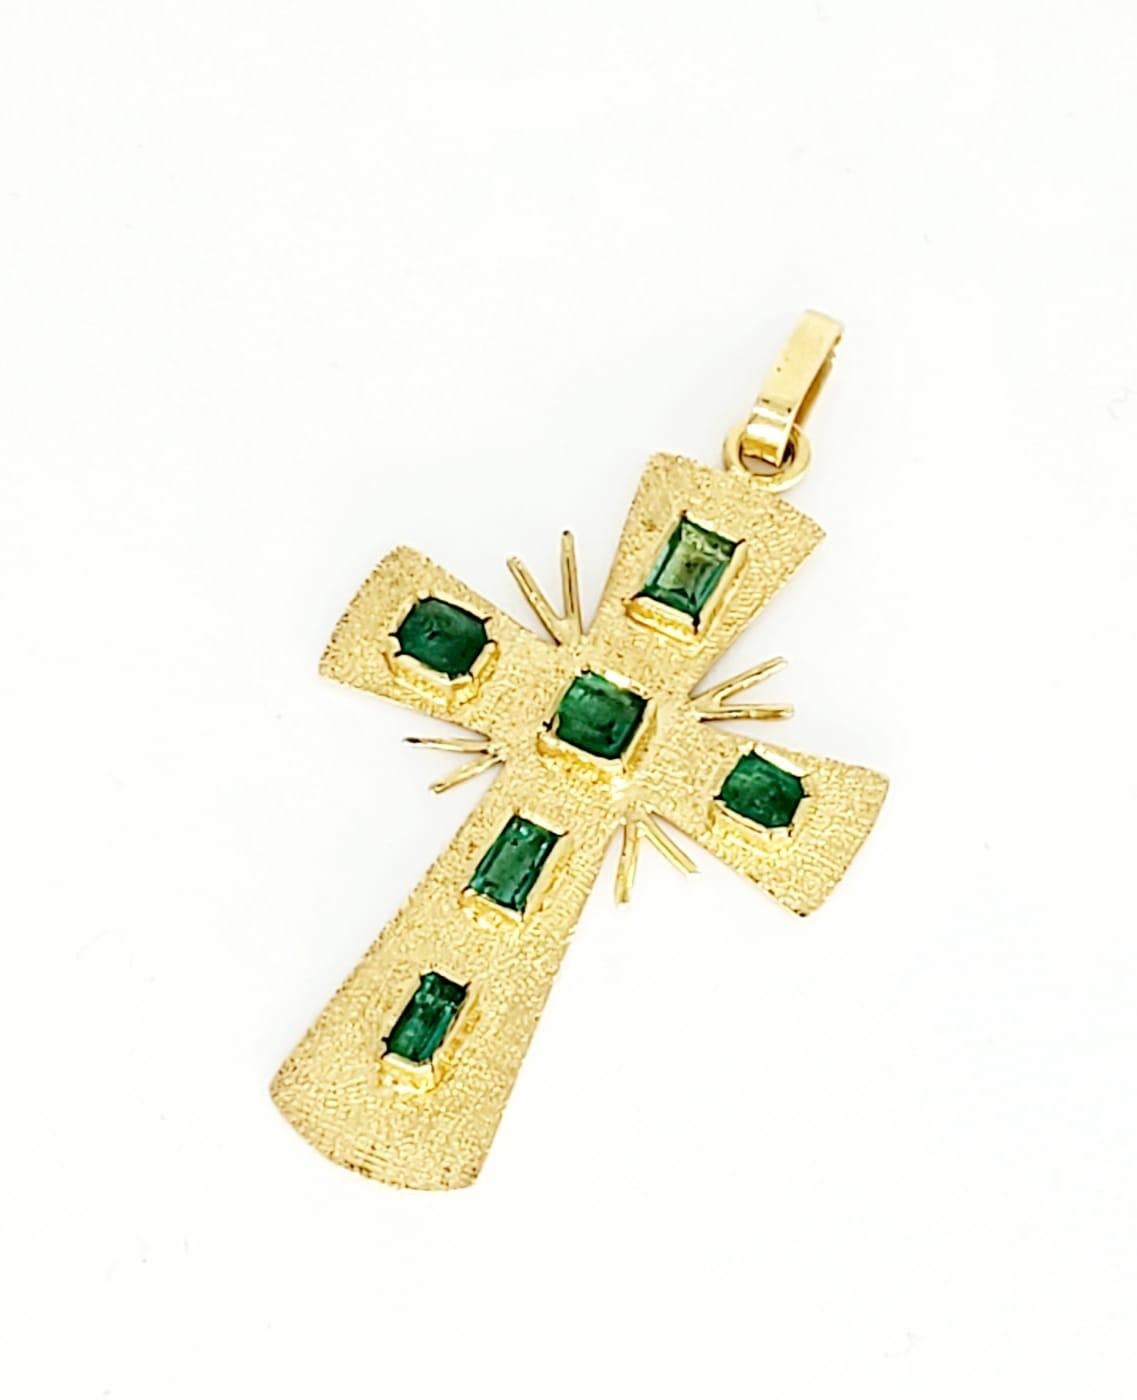 Vintage 1.00 Carat Colombian Emerald 18k Gold Cross Pendant. The pendant measures 2”x1” and weights approx 4.5 grams 18k solid gold.